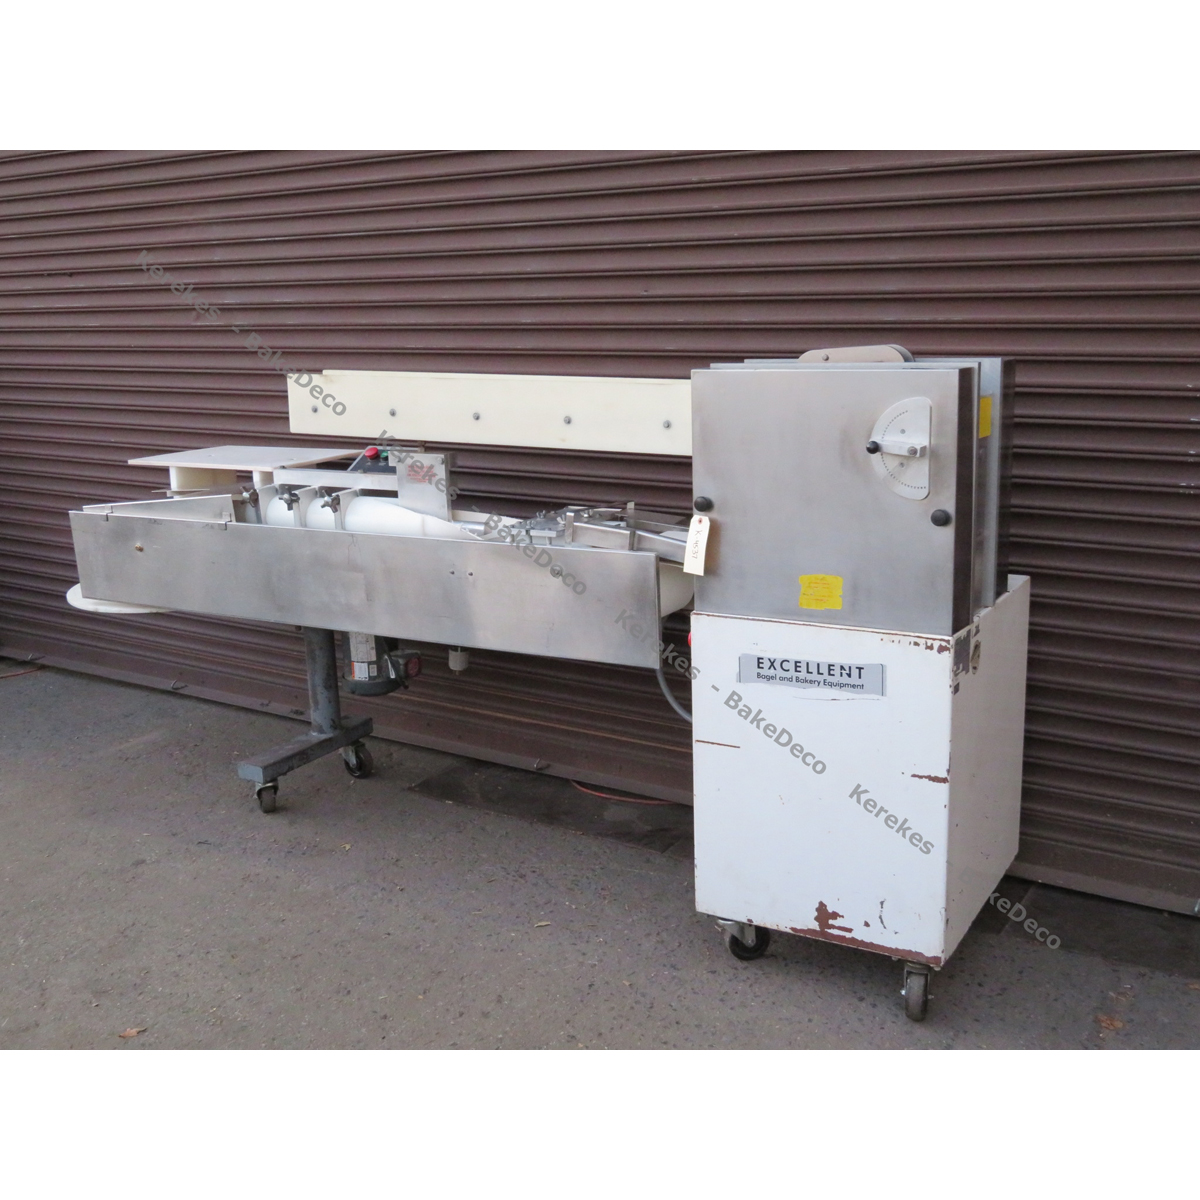 Excellent Bakery Equipment Bagel Former KSD-100/KSF-300S, Used Excellent Condition image 1